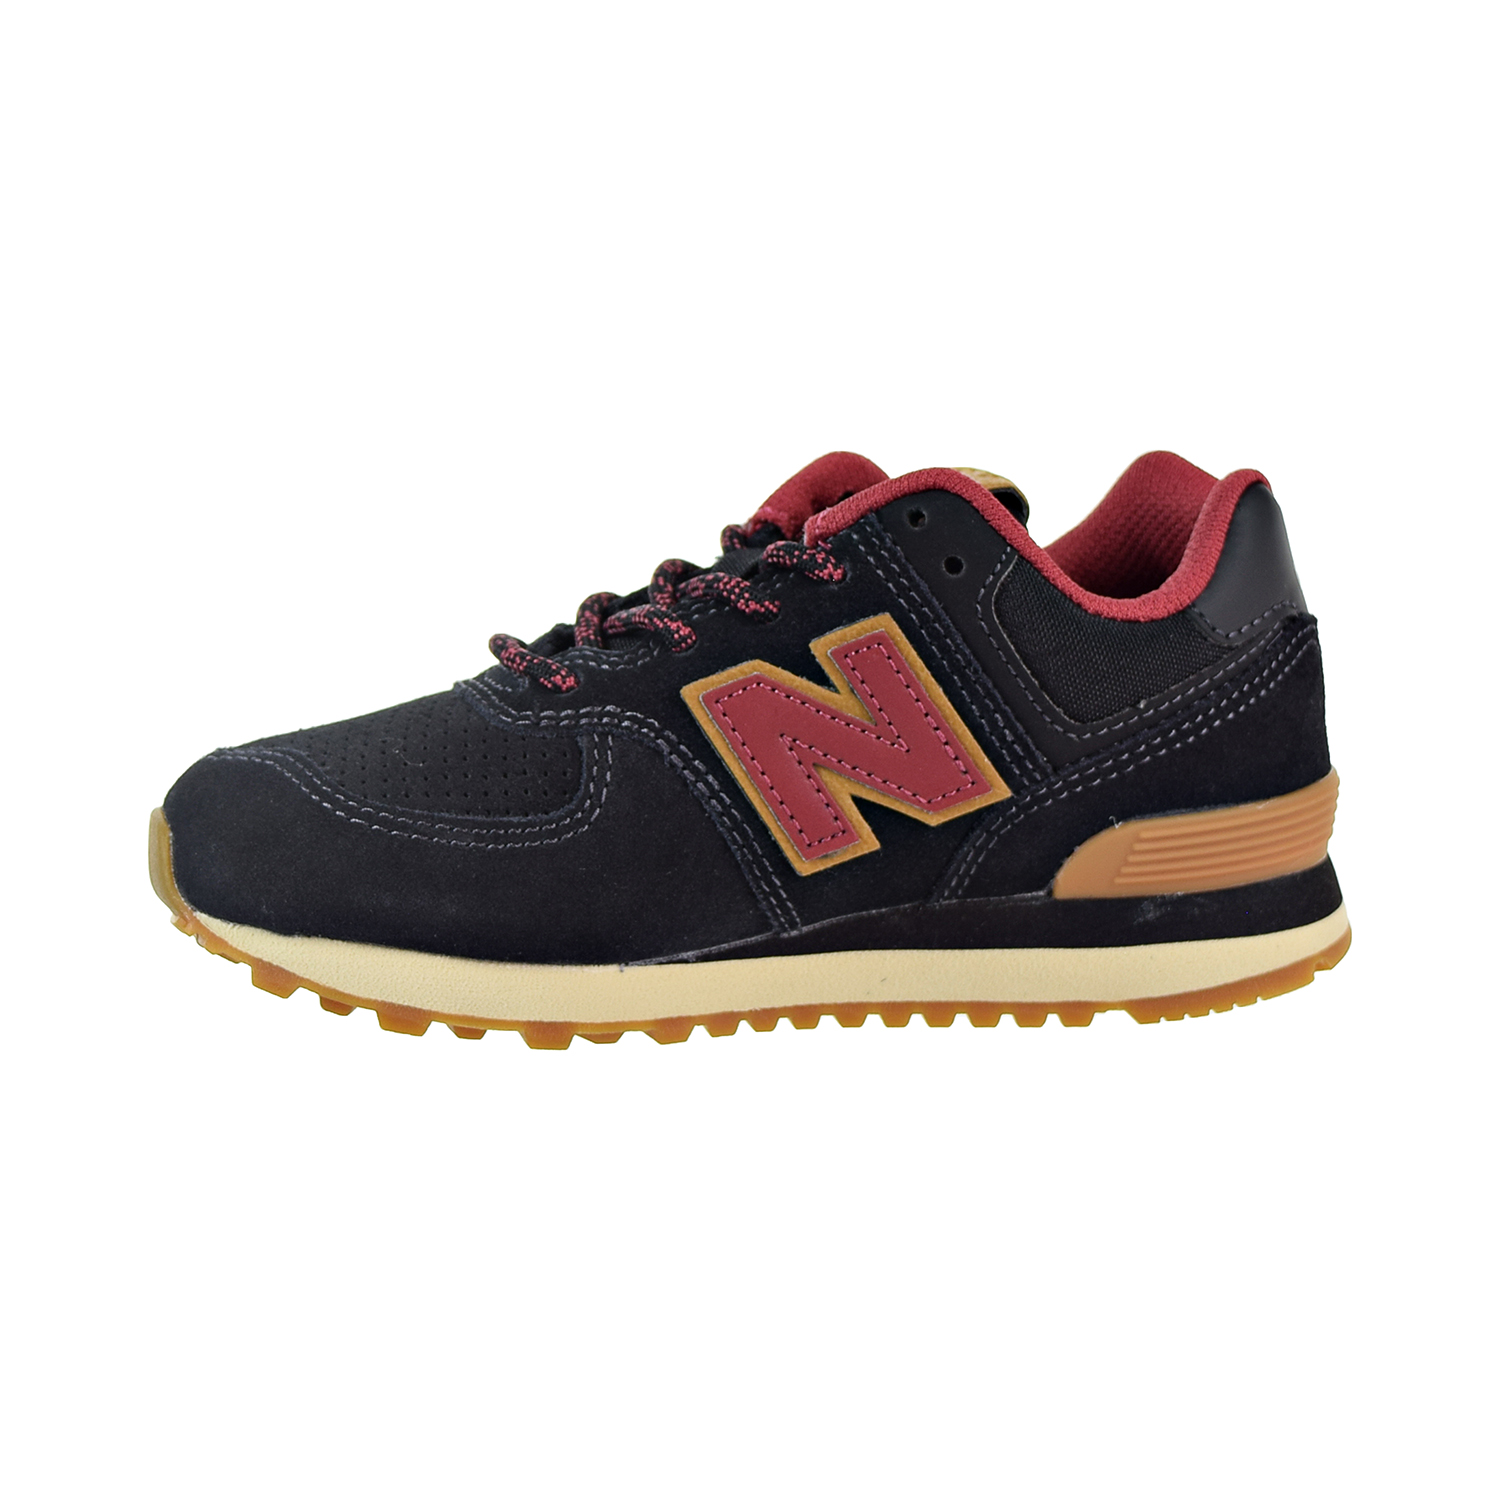 new balance 574 black with earth red